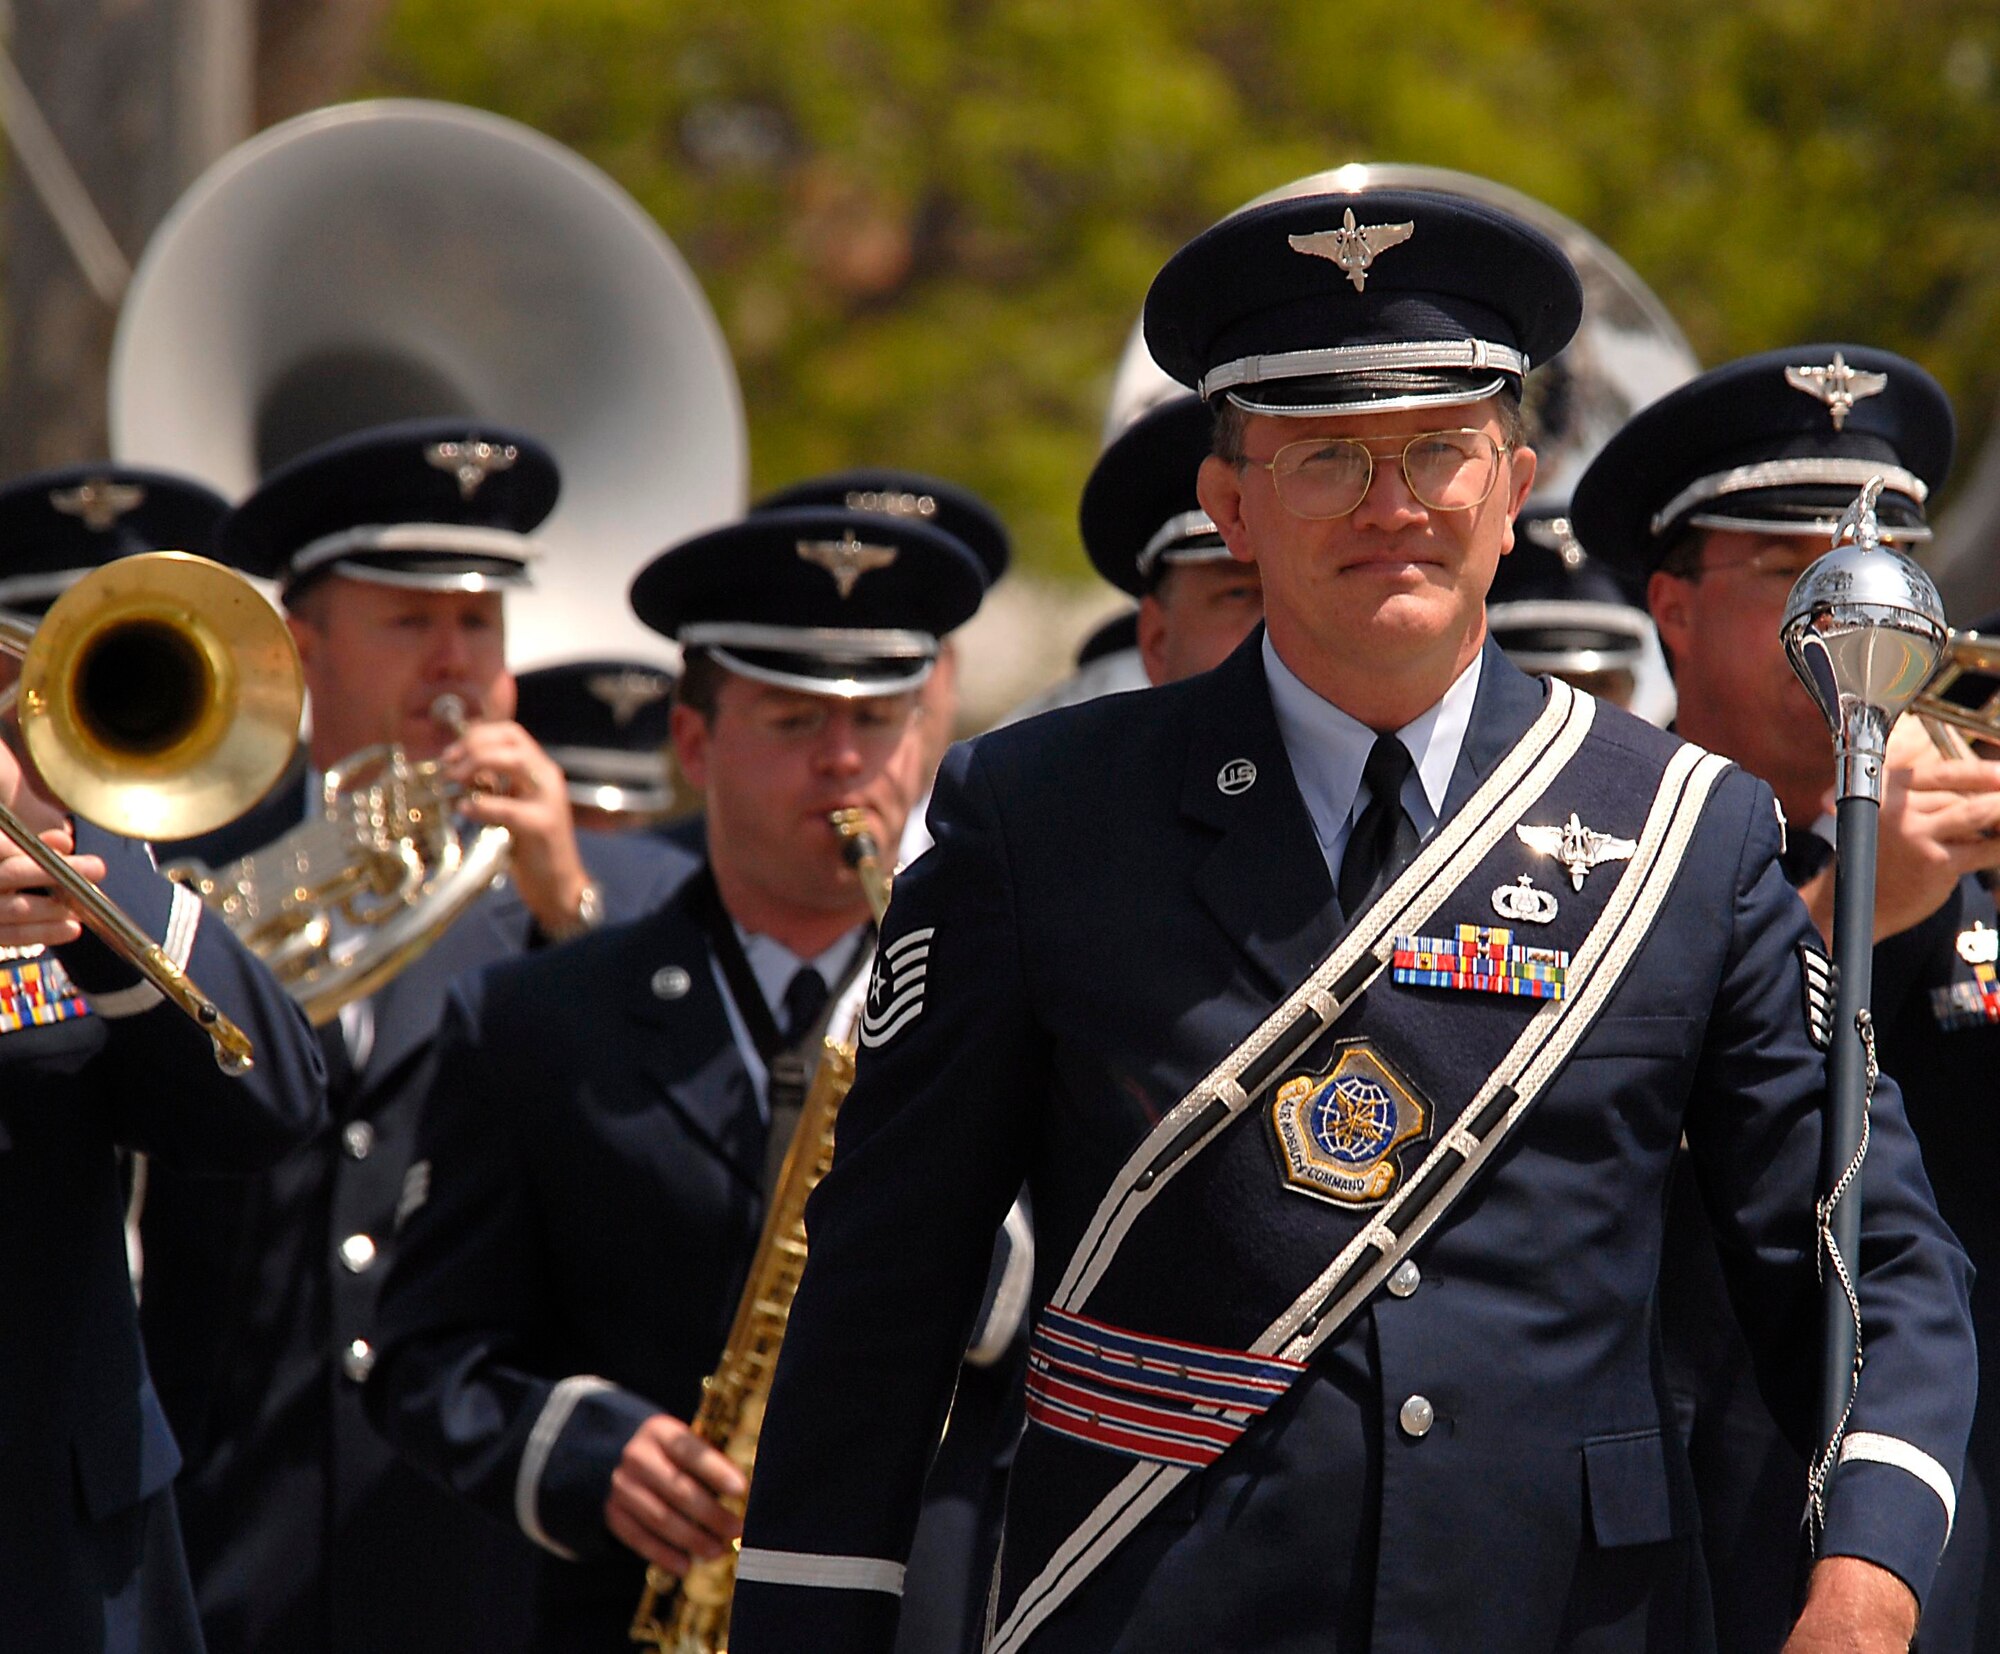 The Air Force's Band of the Golden West from Travis AFB marched in the 2007 Torrance Armed Forces Day Parade, May 19. Gen. Kevin Chilton, Air Force Space Command commander, served as the Grand Marshal for the parade. A Los Angeles AFB honor guard led the way as Los Angeles, Edwards, and Vandenberg Air Force Bases and March Air Reserve Base marched passed the crowds with a total of more than 300 airmen participating. 
